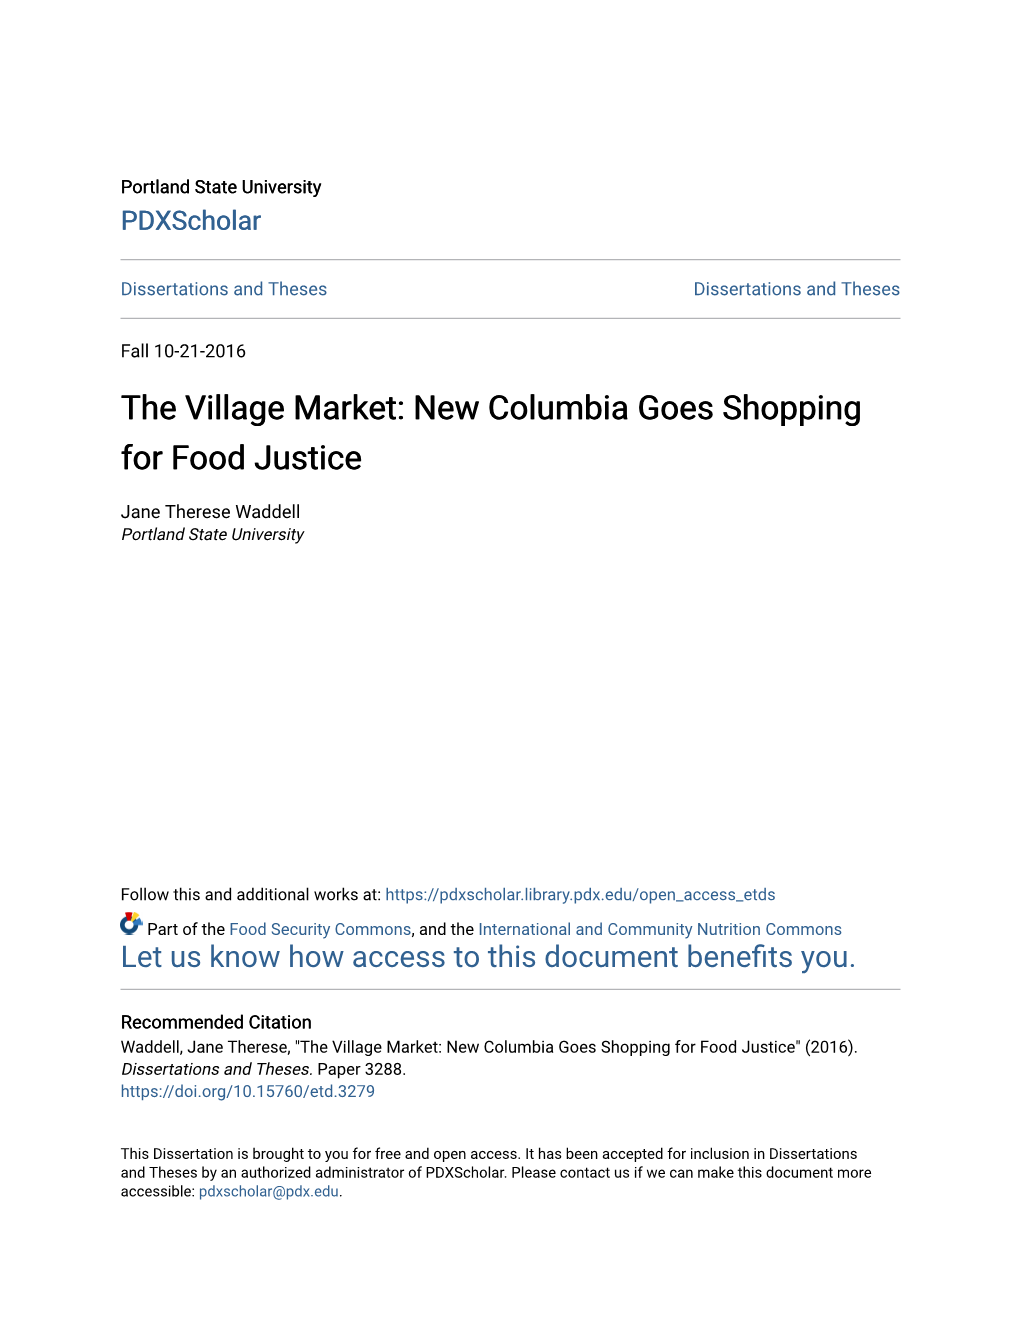 The Village Market: New Columbia Goes Shopping for Food Justice